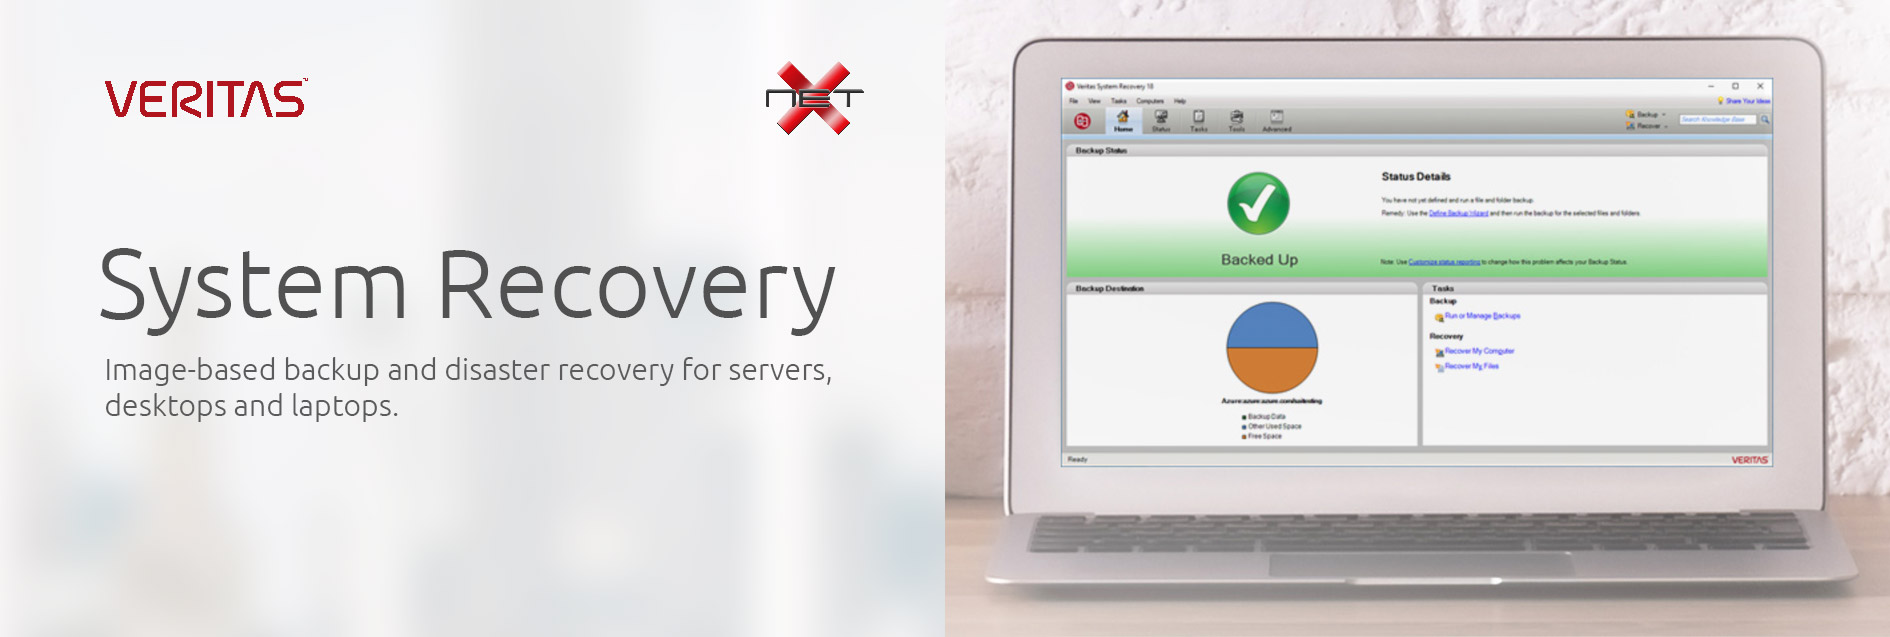 veritas system recovery with netx professional services banner